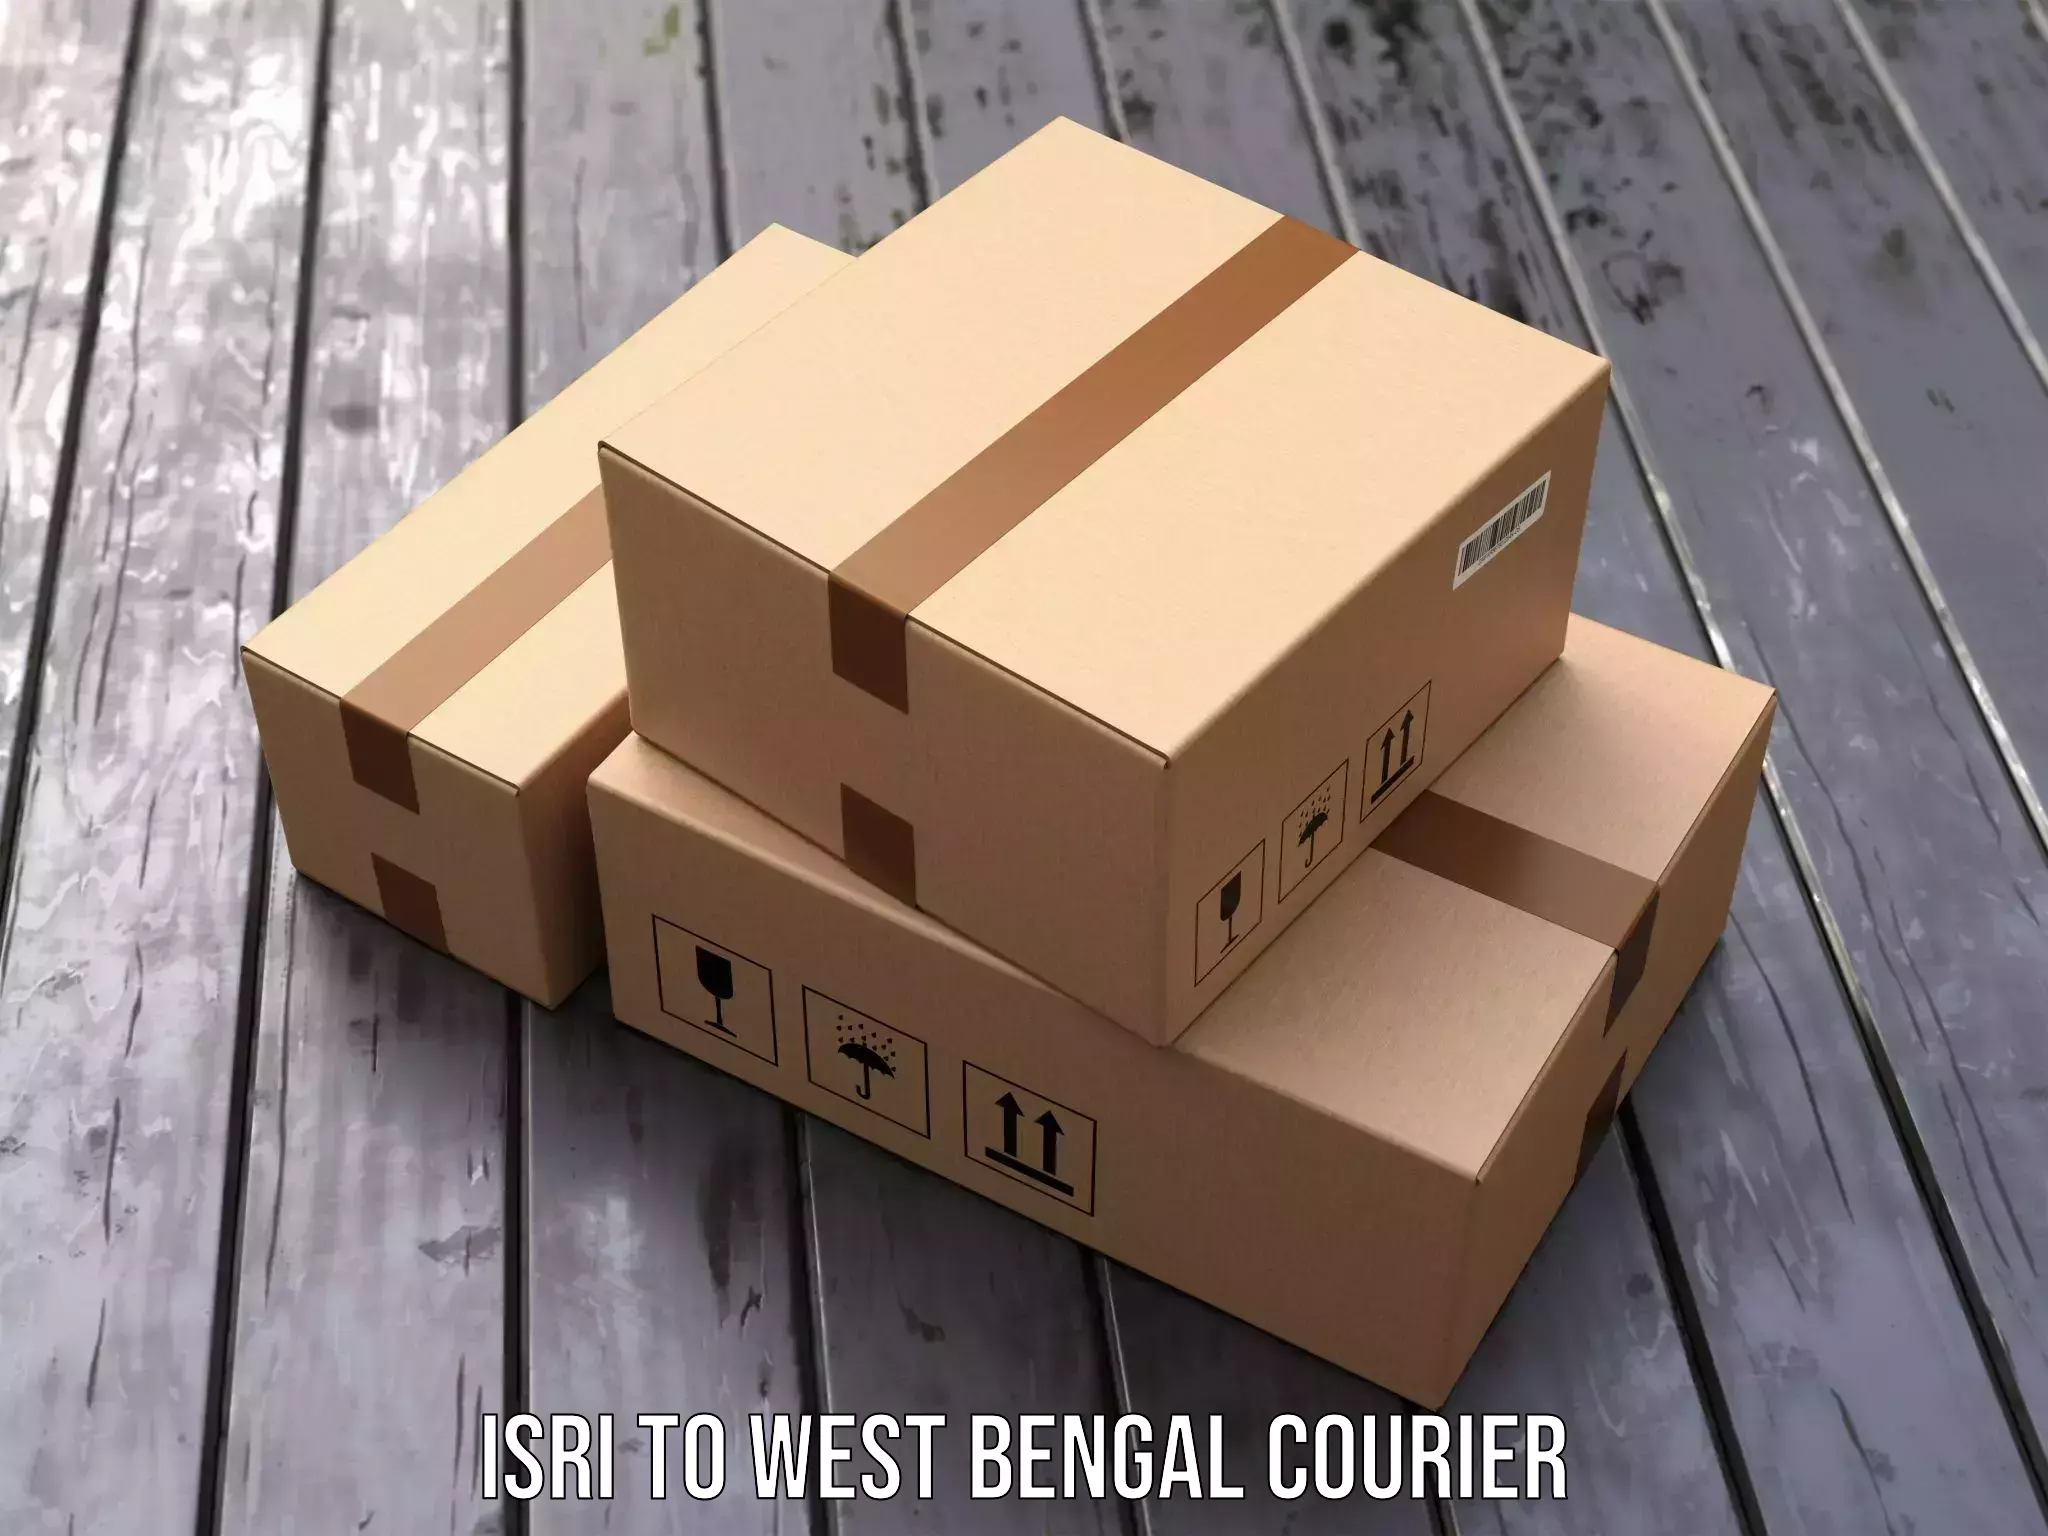 Efficient order fulfillment Isri to West Bengal